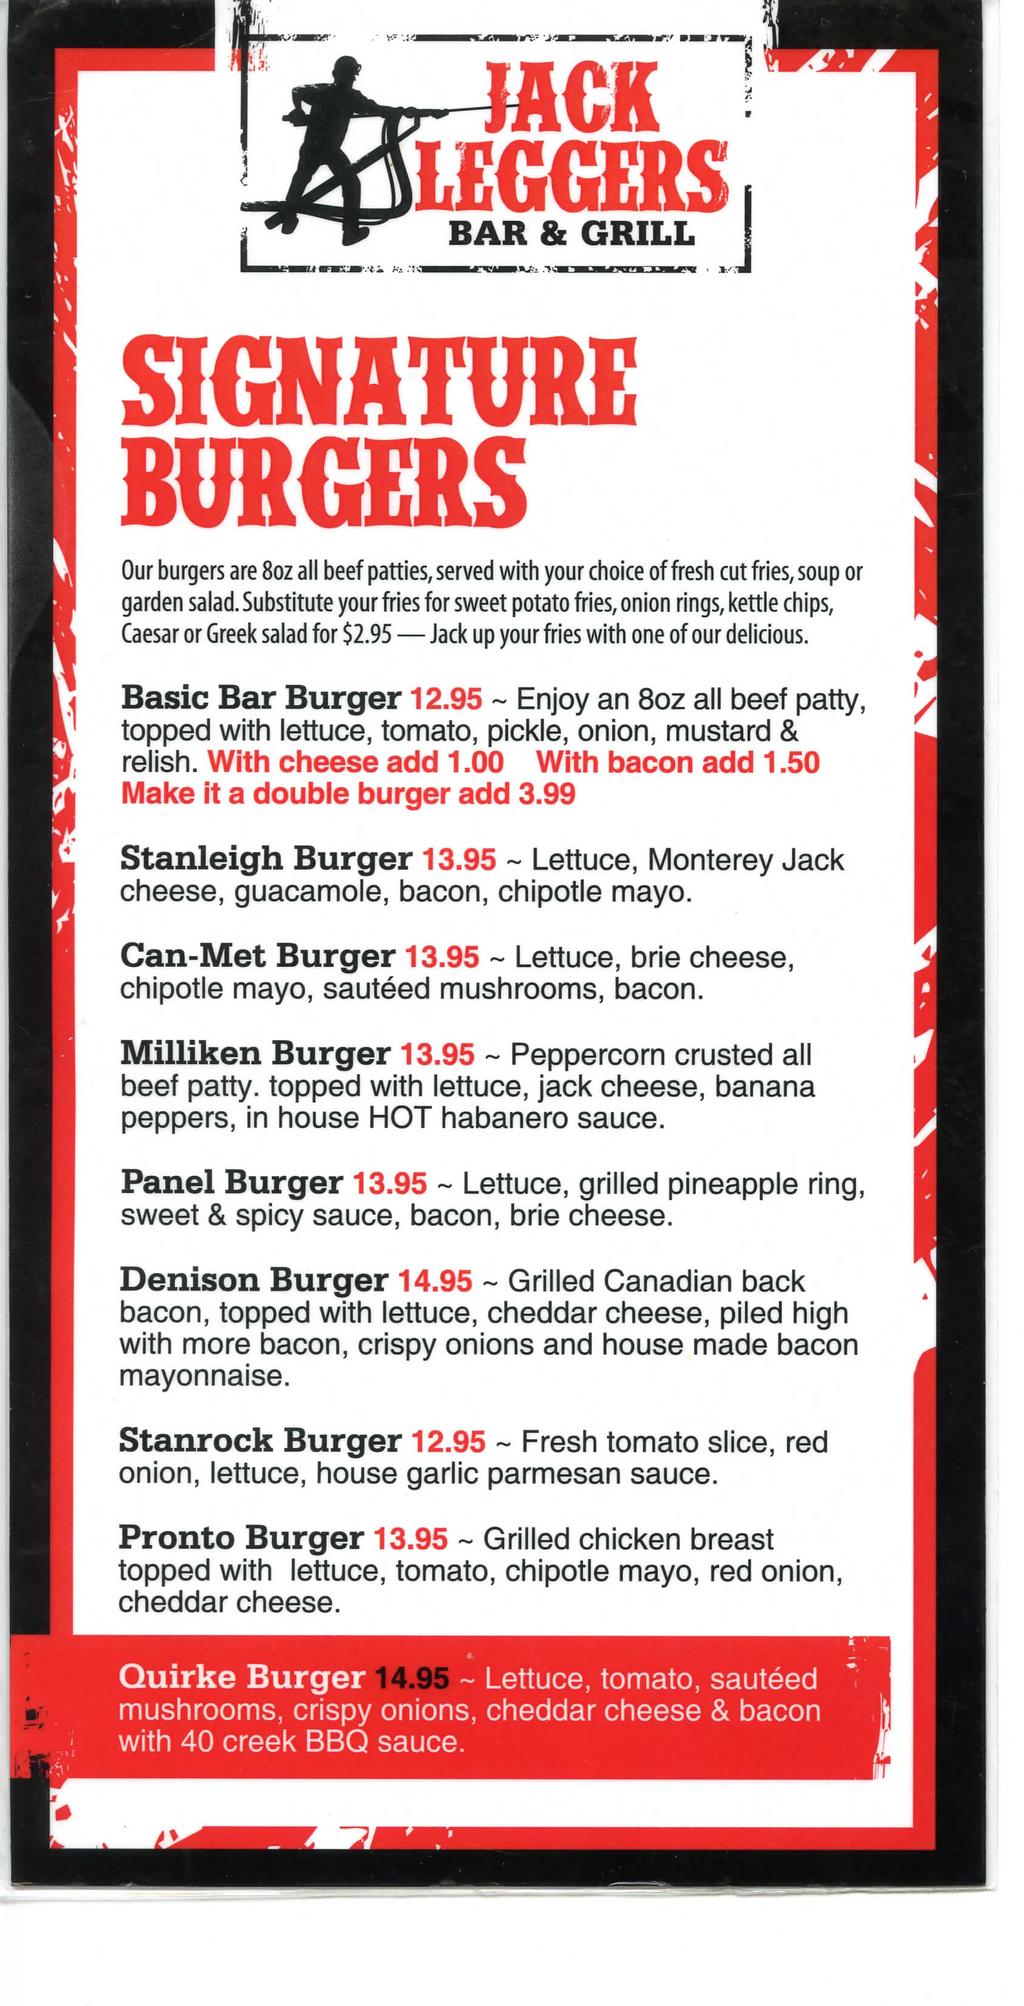 CK LEGGERS BAR & GRILL SIGNATURE BURGERS Our burgers are 8oz all beef patties, served with your choice of fresh cut fries, soup or garden salad.